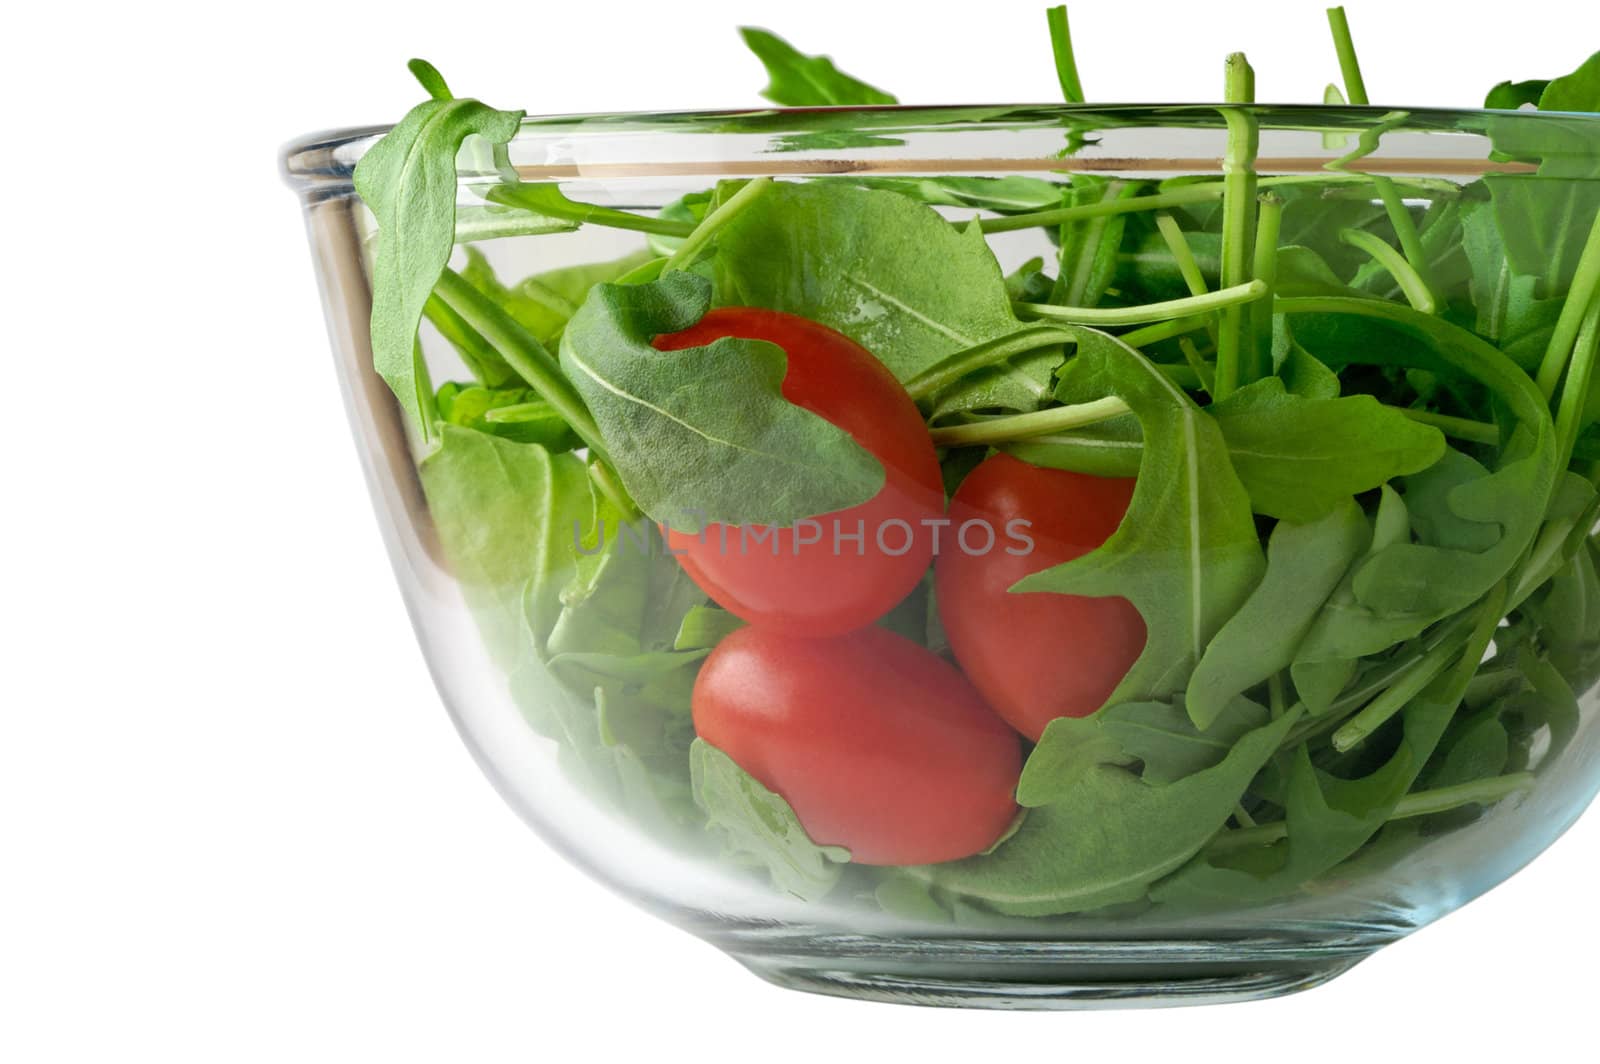 Salad with rugola and cherry tomato in glass bowl (side) with clipping path